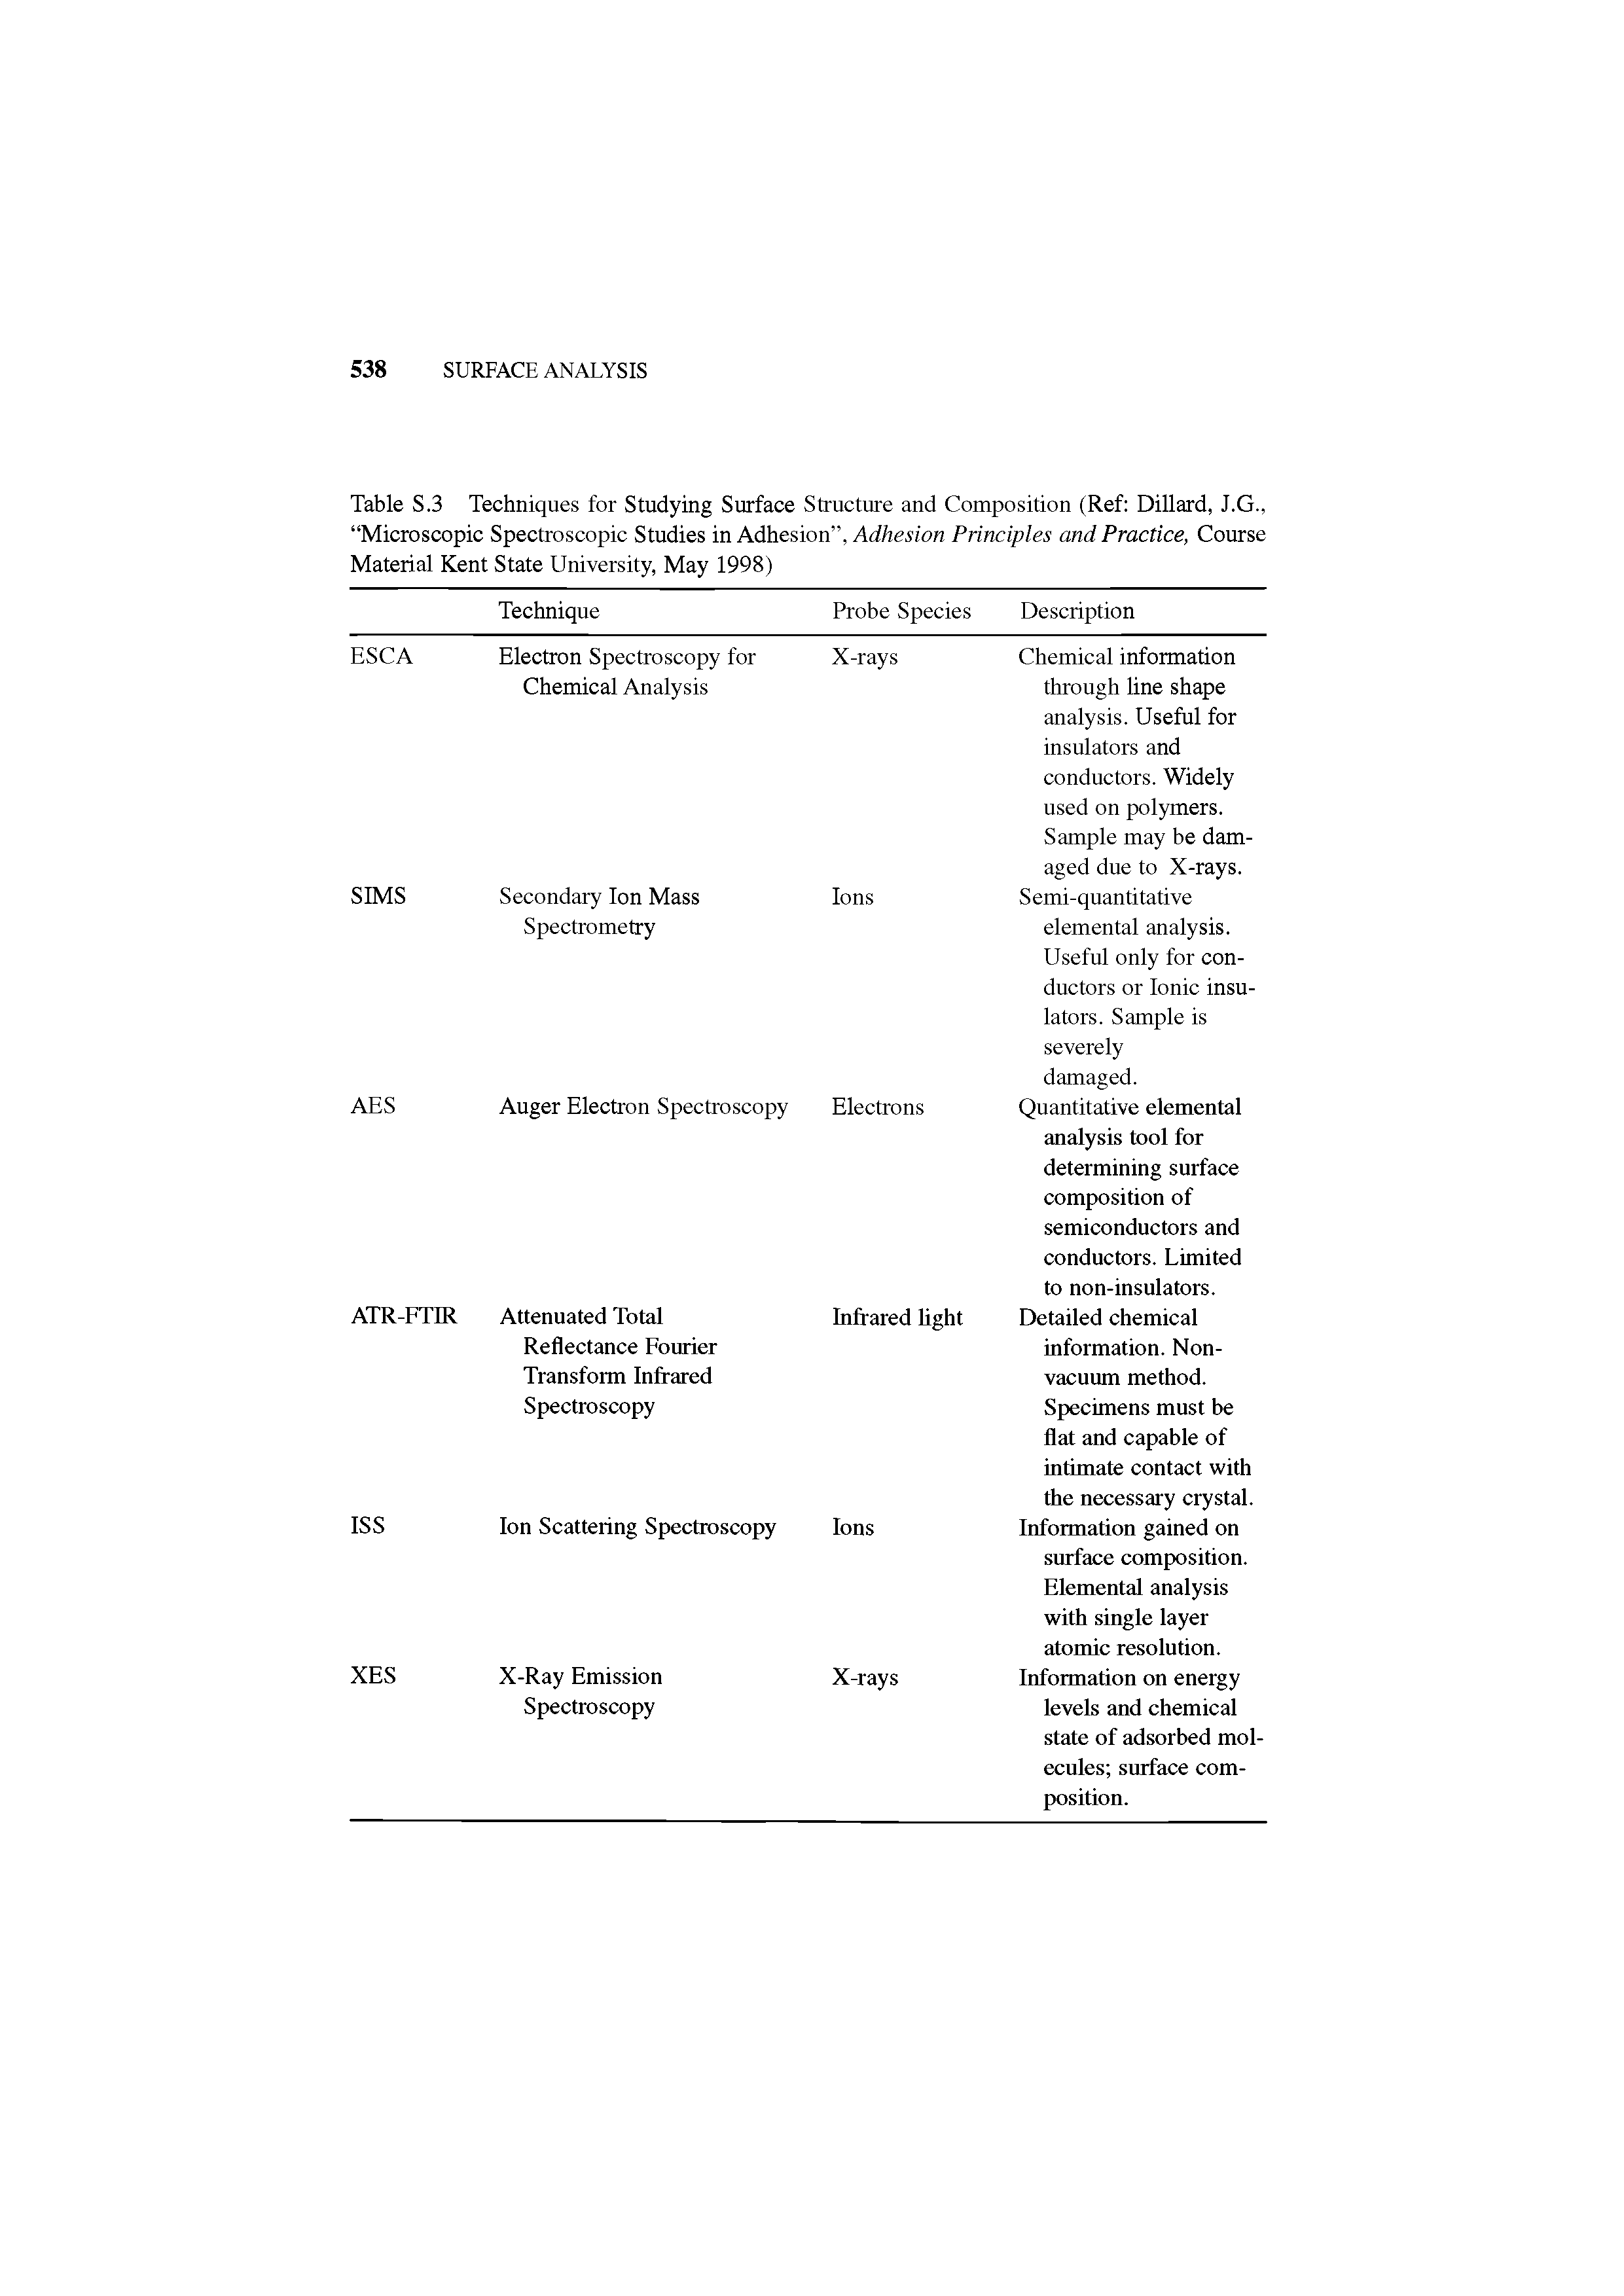 Table S.3 Techniques for Studying Surface Structure and Composition (Ref Dillard, J.G., Microscopic Spectroscopic Studies in Adhesion , Adhesion Principles and Practice, Course Material Kent State University, May 1998)...